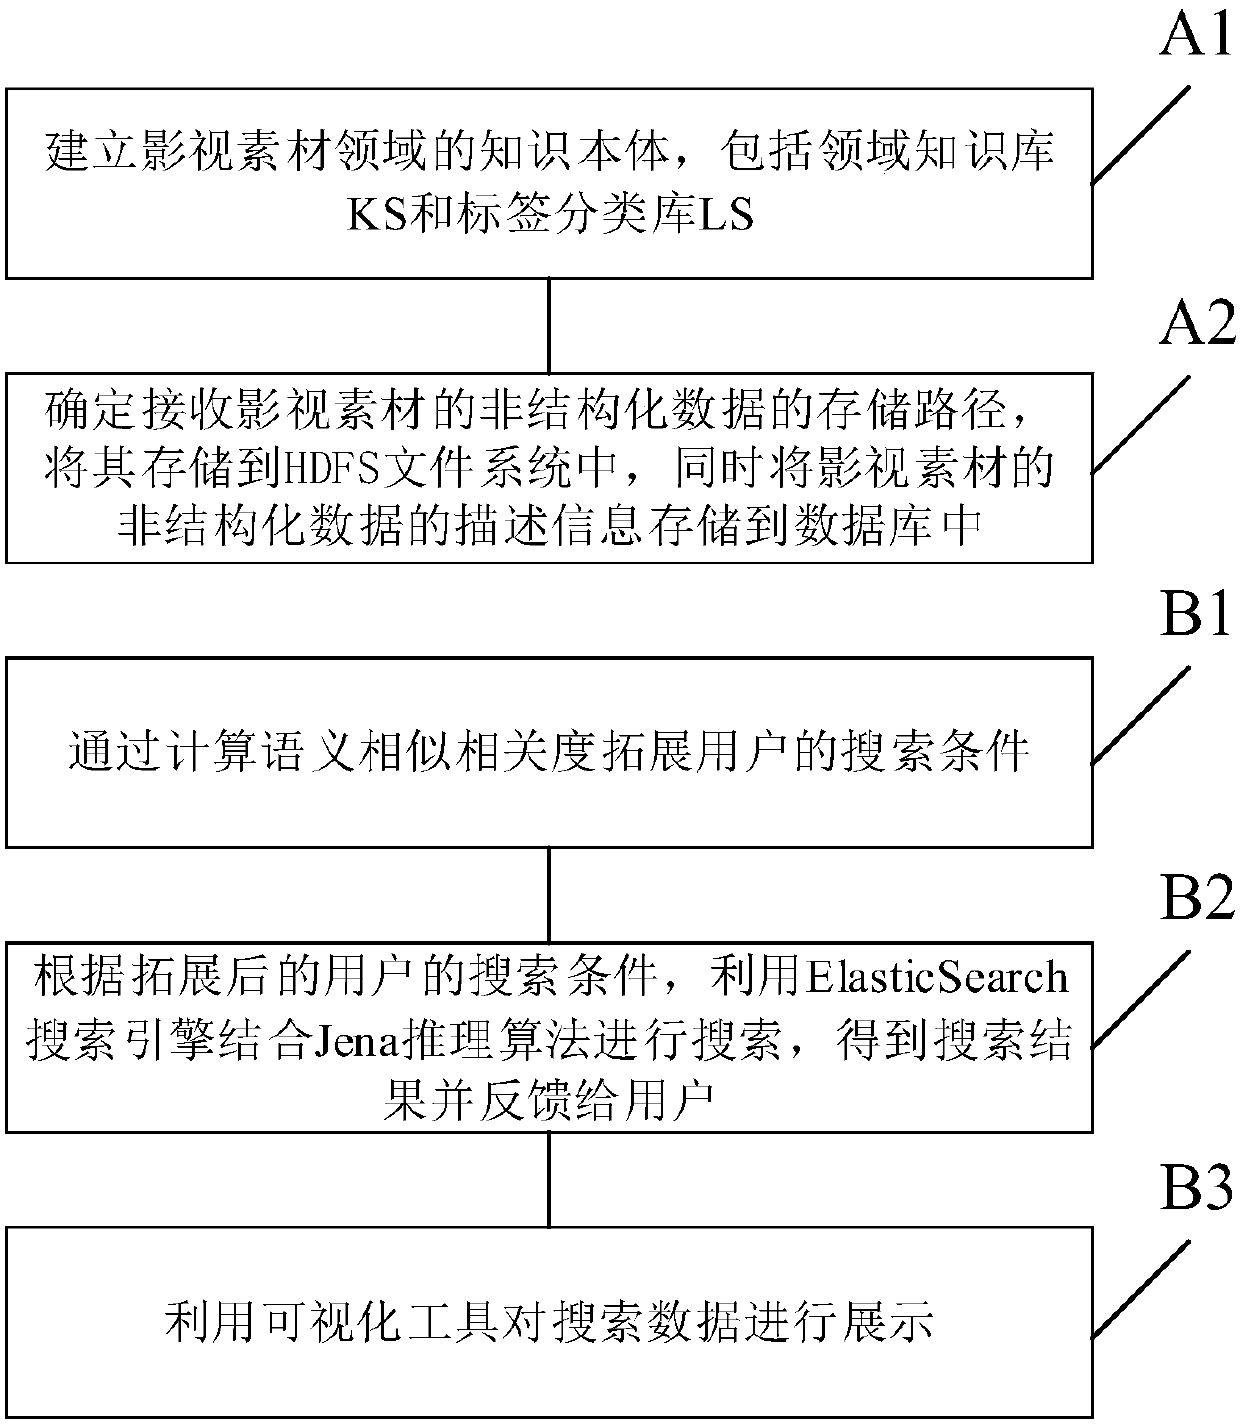 Unstructured data managing method for field of film and television materials